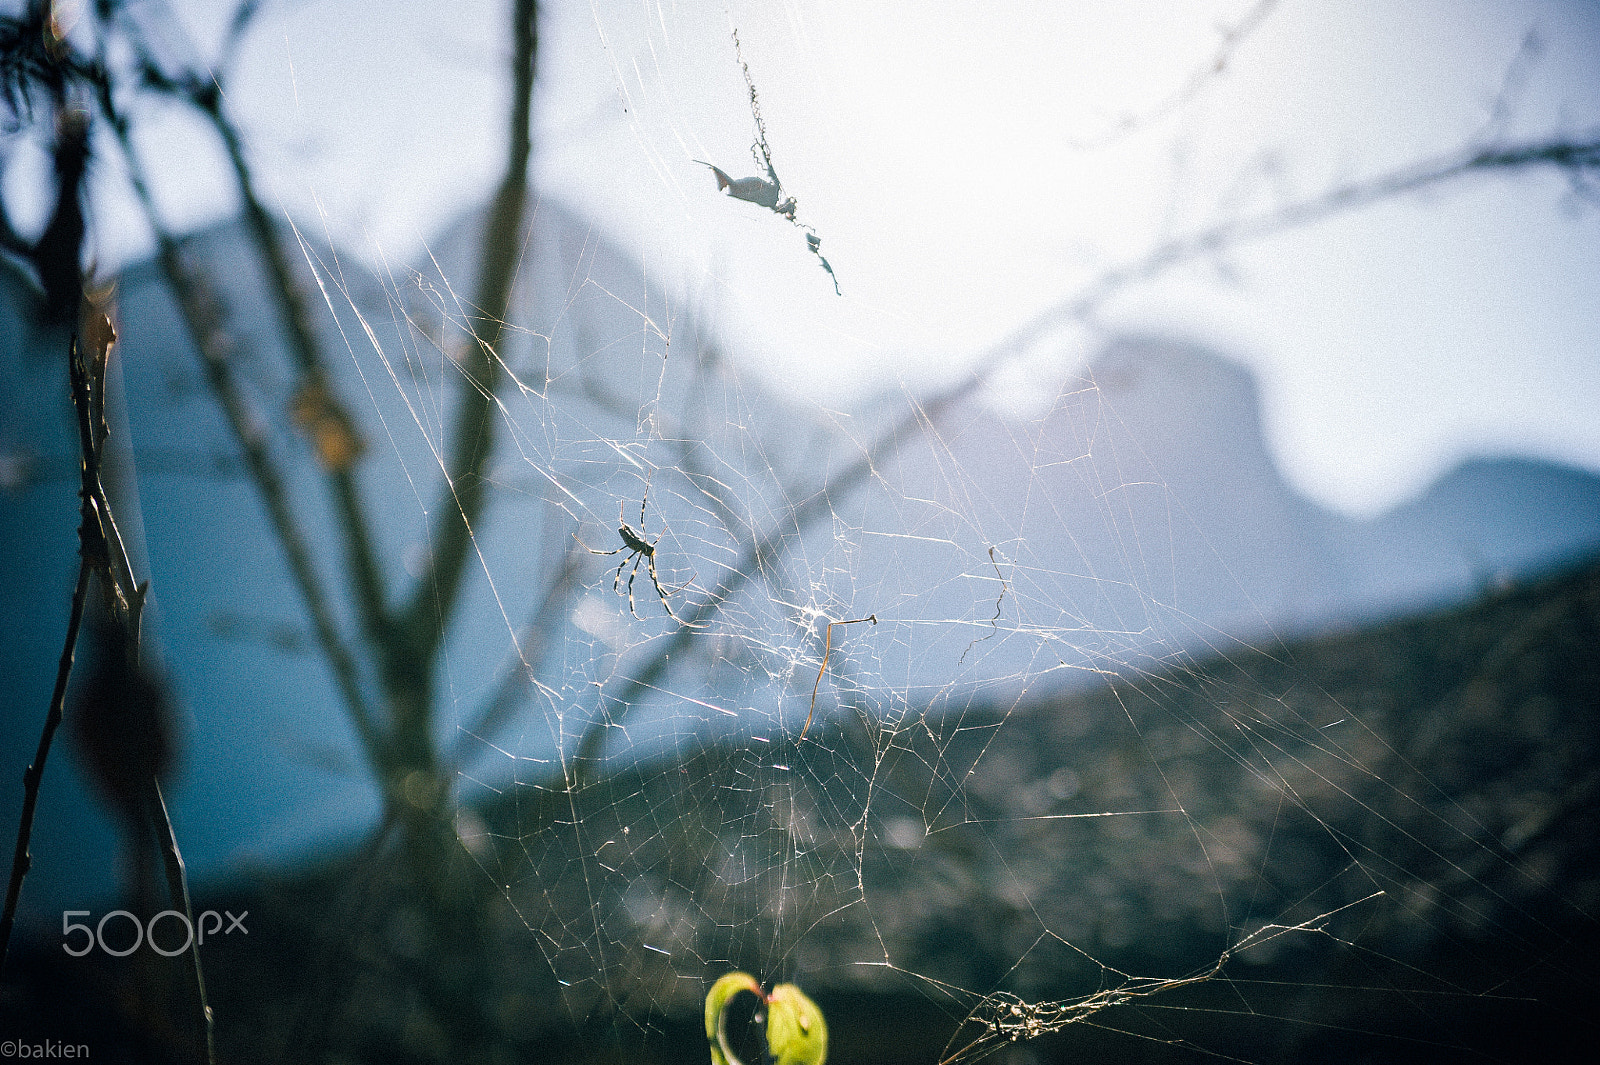 Nikon D700 sample photo. The spider photography